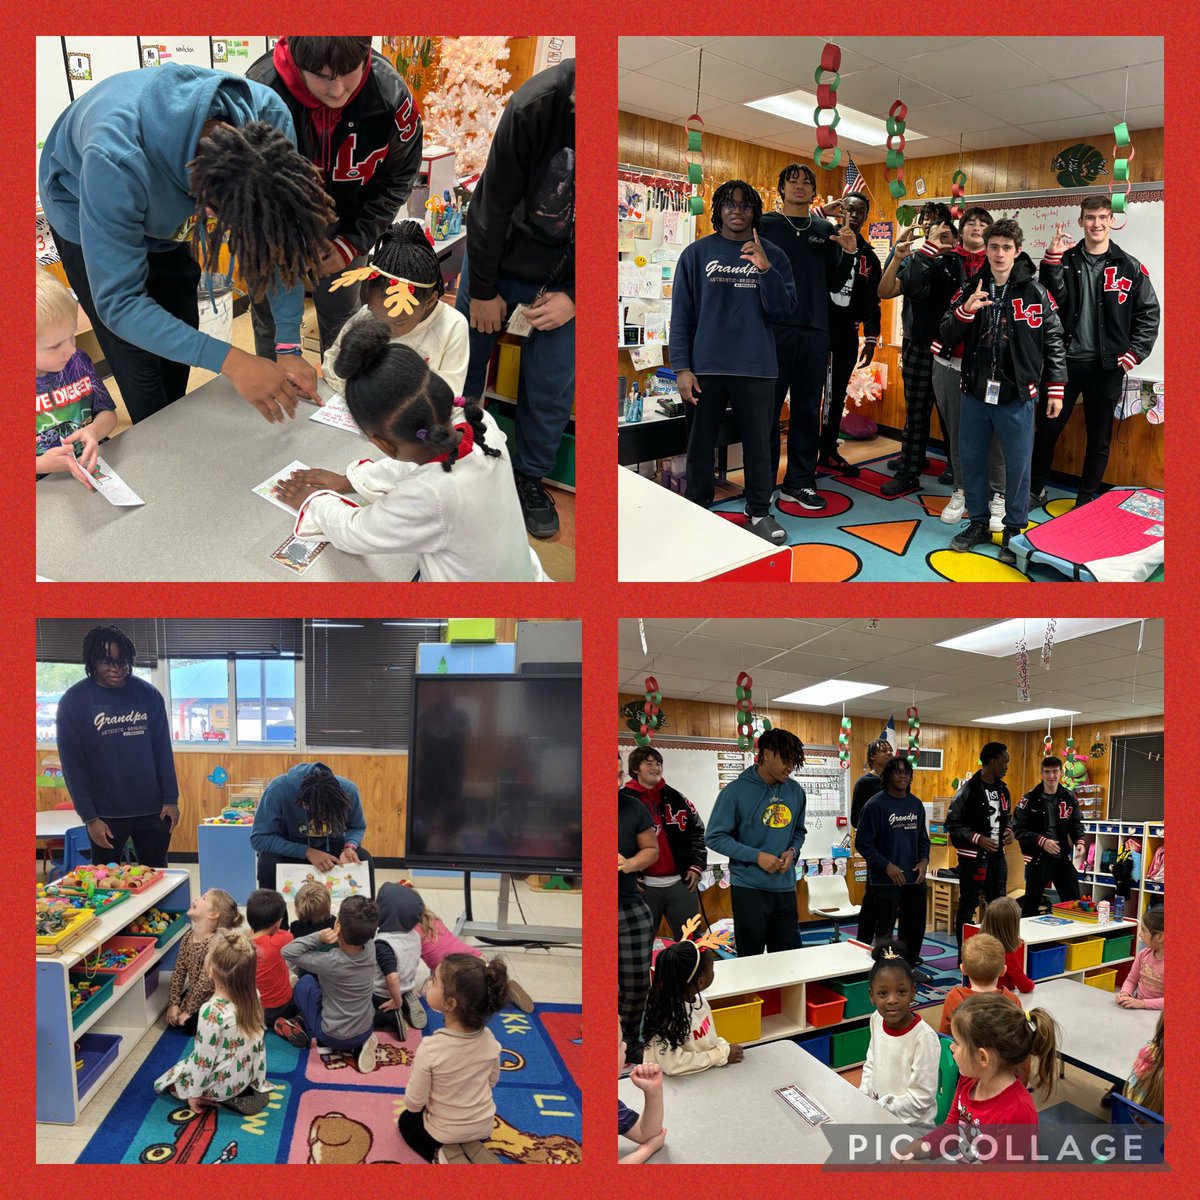 Thank you to the Langham Creek Football team for coming to @Barker_ELC and reading, singing, and dancing with our classes today. The children enjoyed your visit. Great group of young men! @LCLobosFootball #CFISDELCS @langhamcreekhs